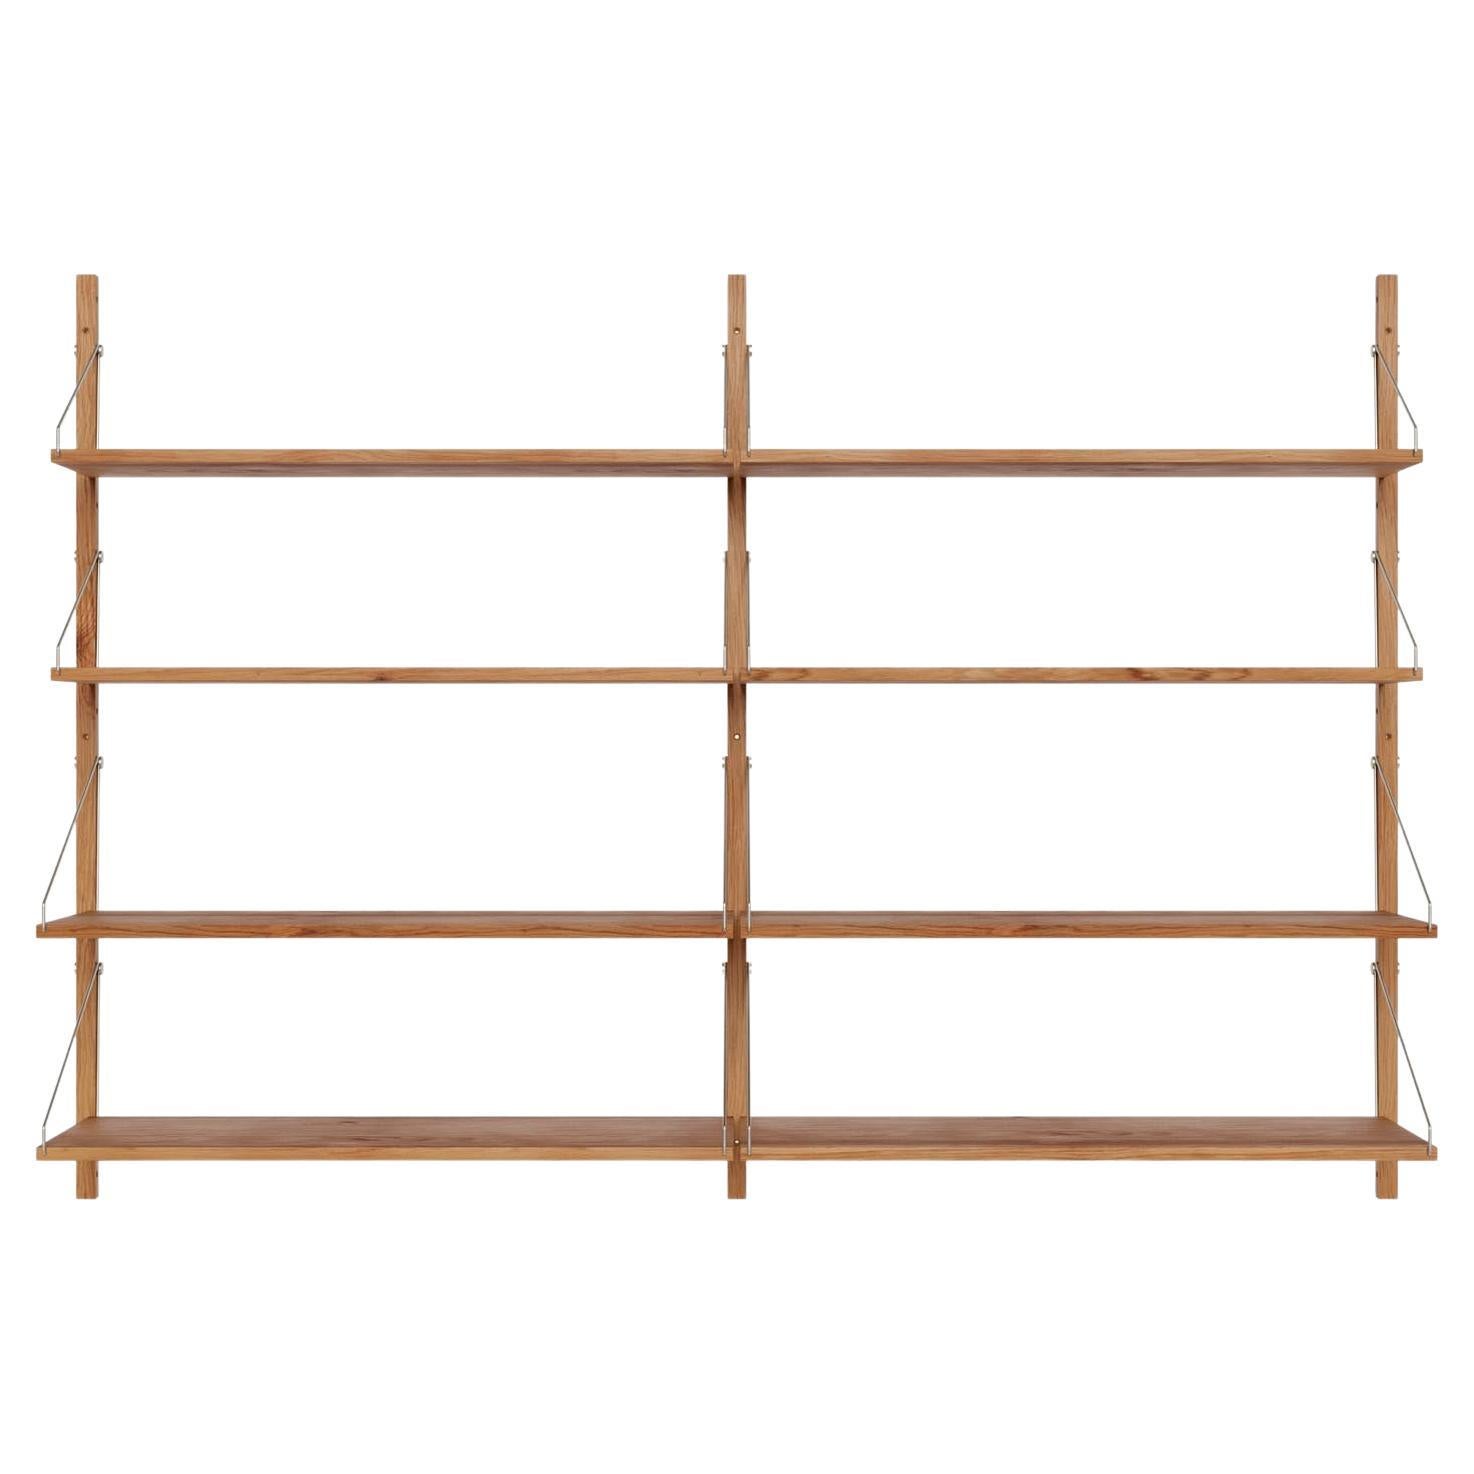 FRAMA Contemporary Minimal Design Wooden Wall Shelf Library Double Section